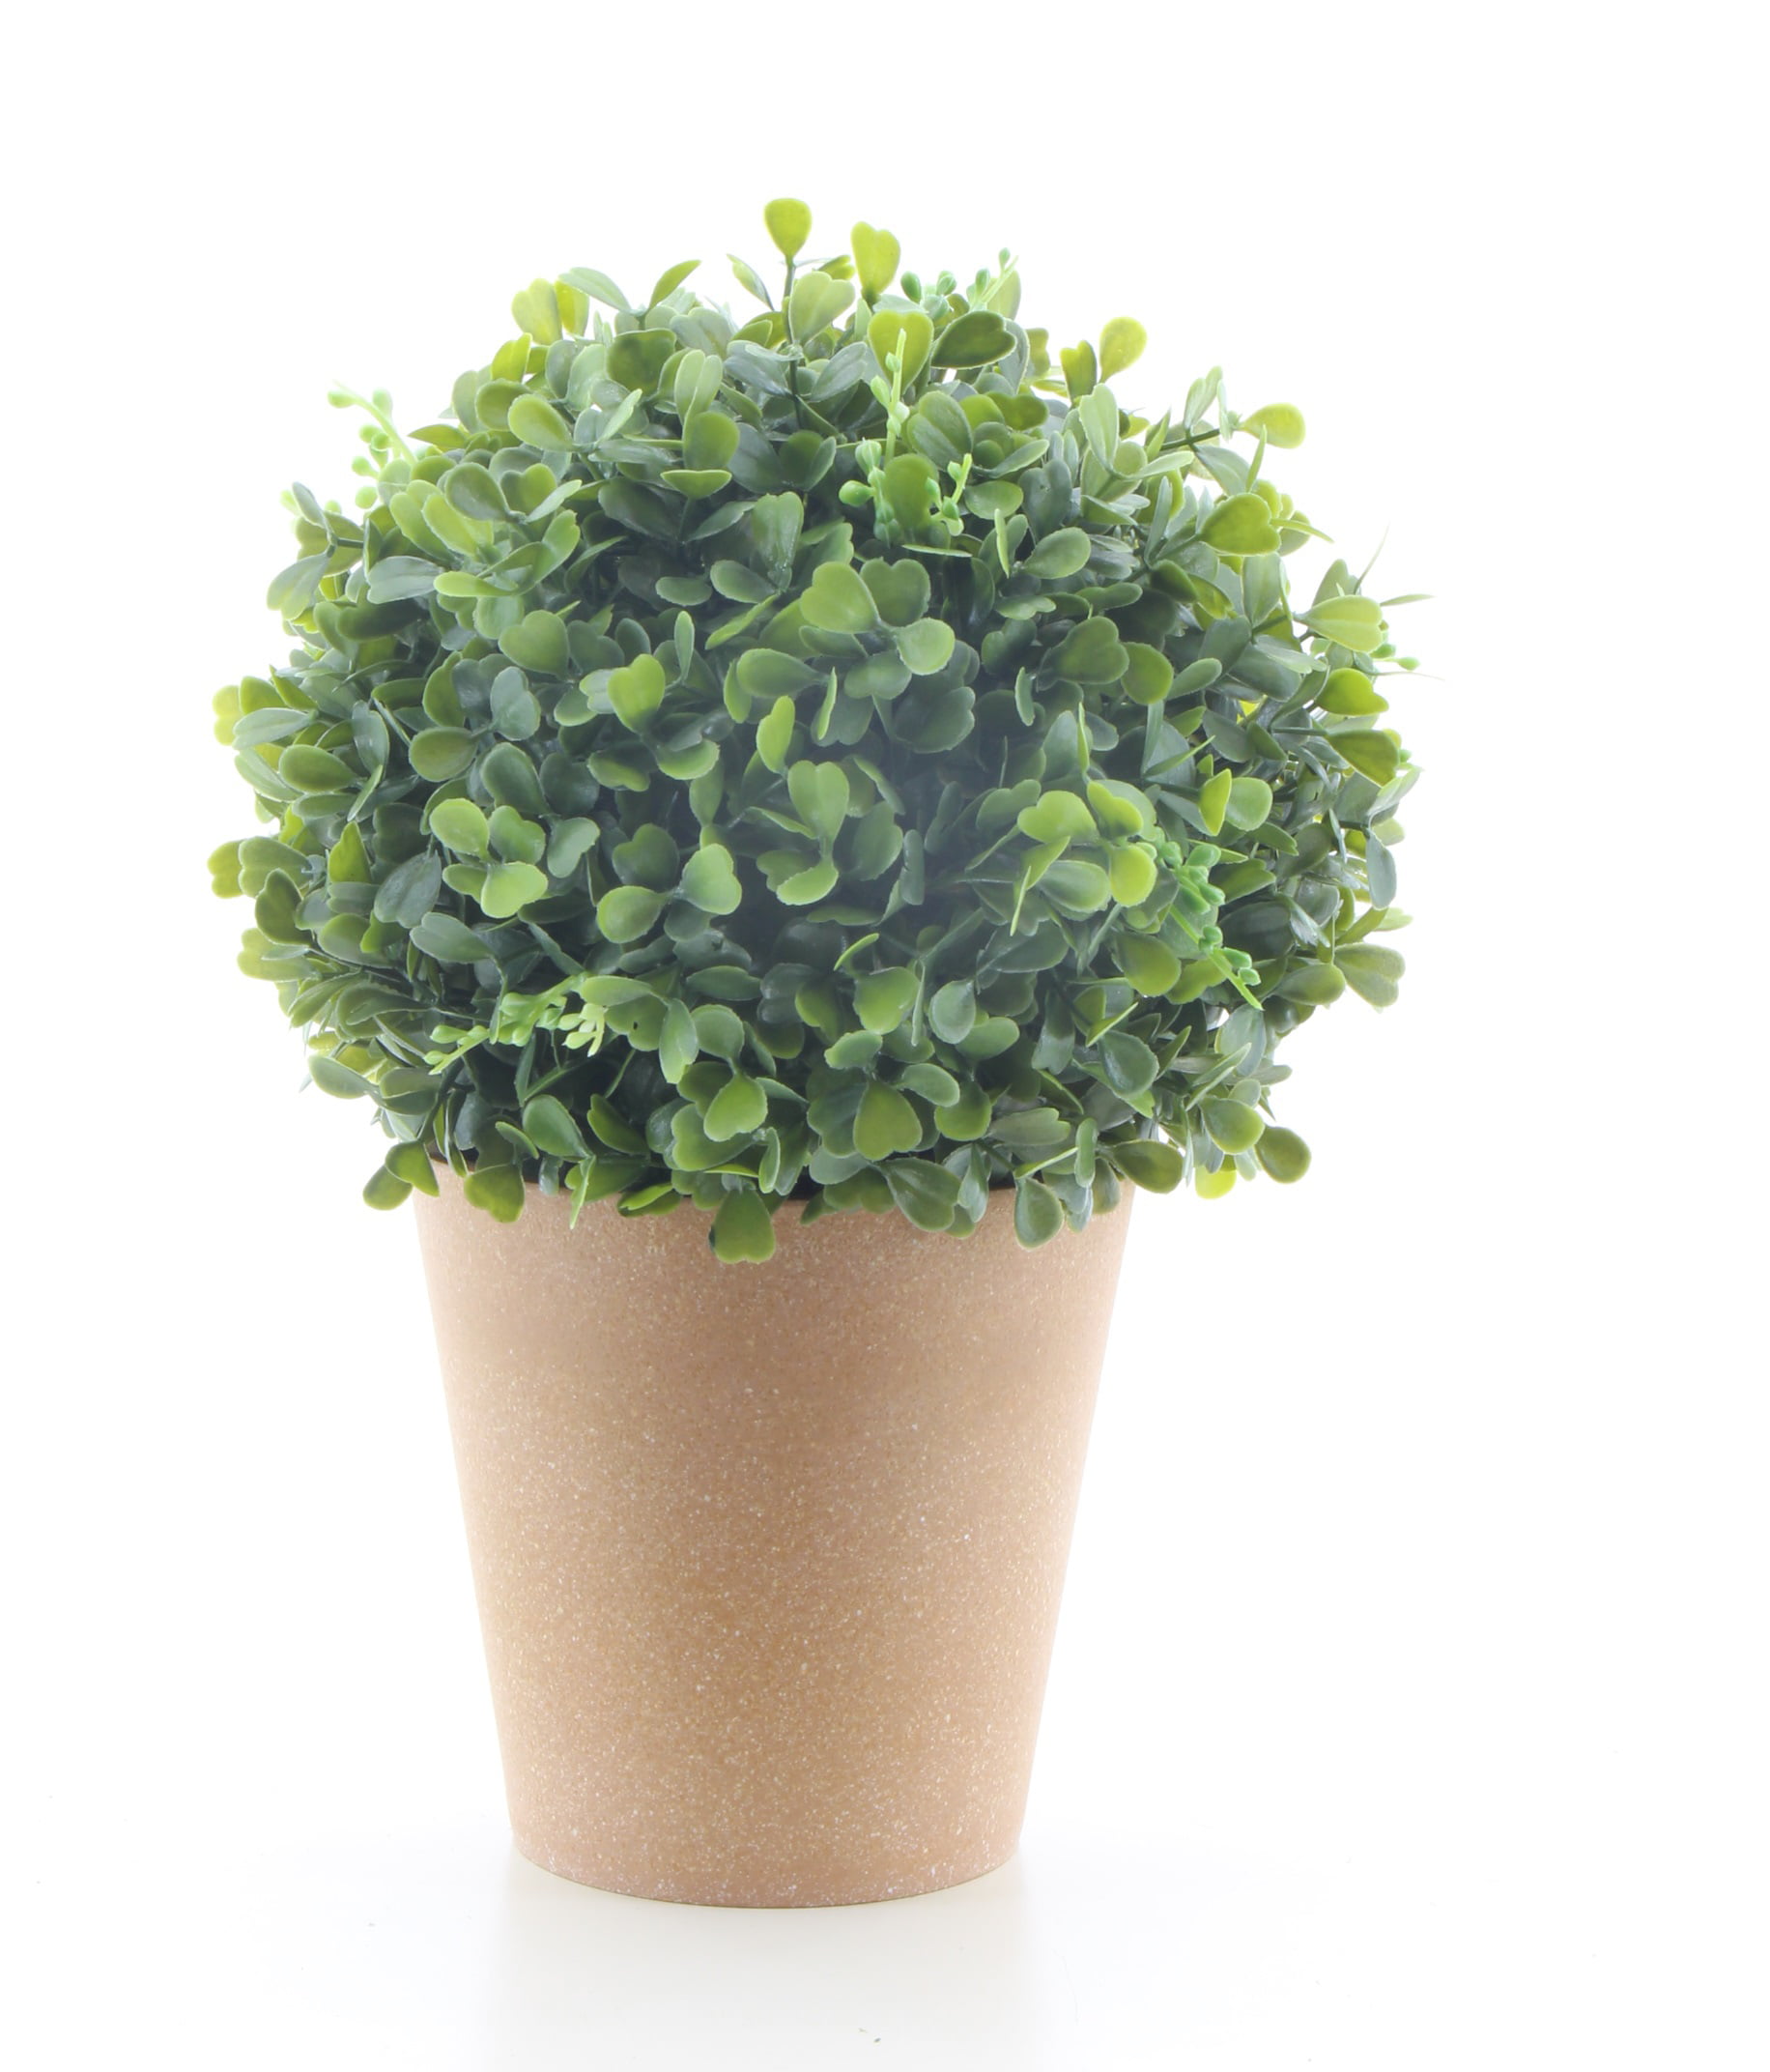 Miniature 4" Topiary Tree Realistic Faux Plant Ball Clay Pot Table Diaplay 